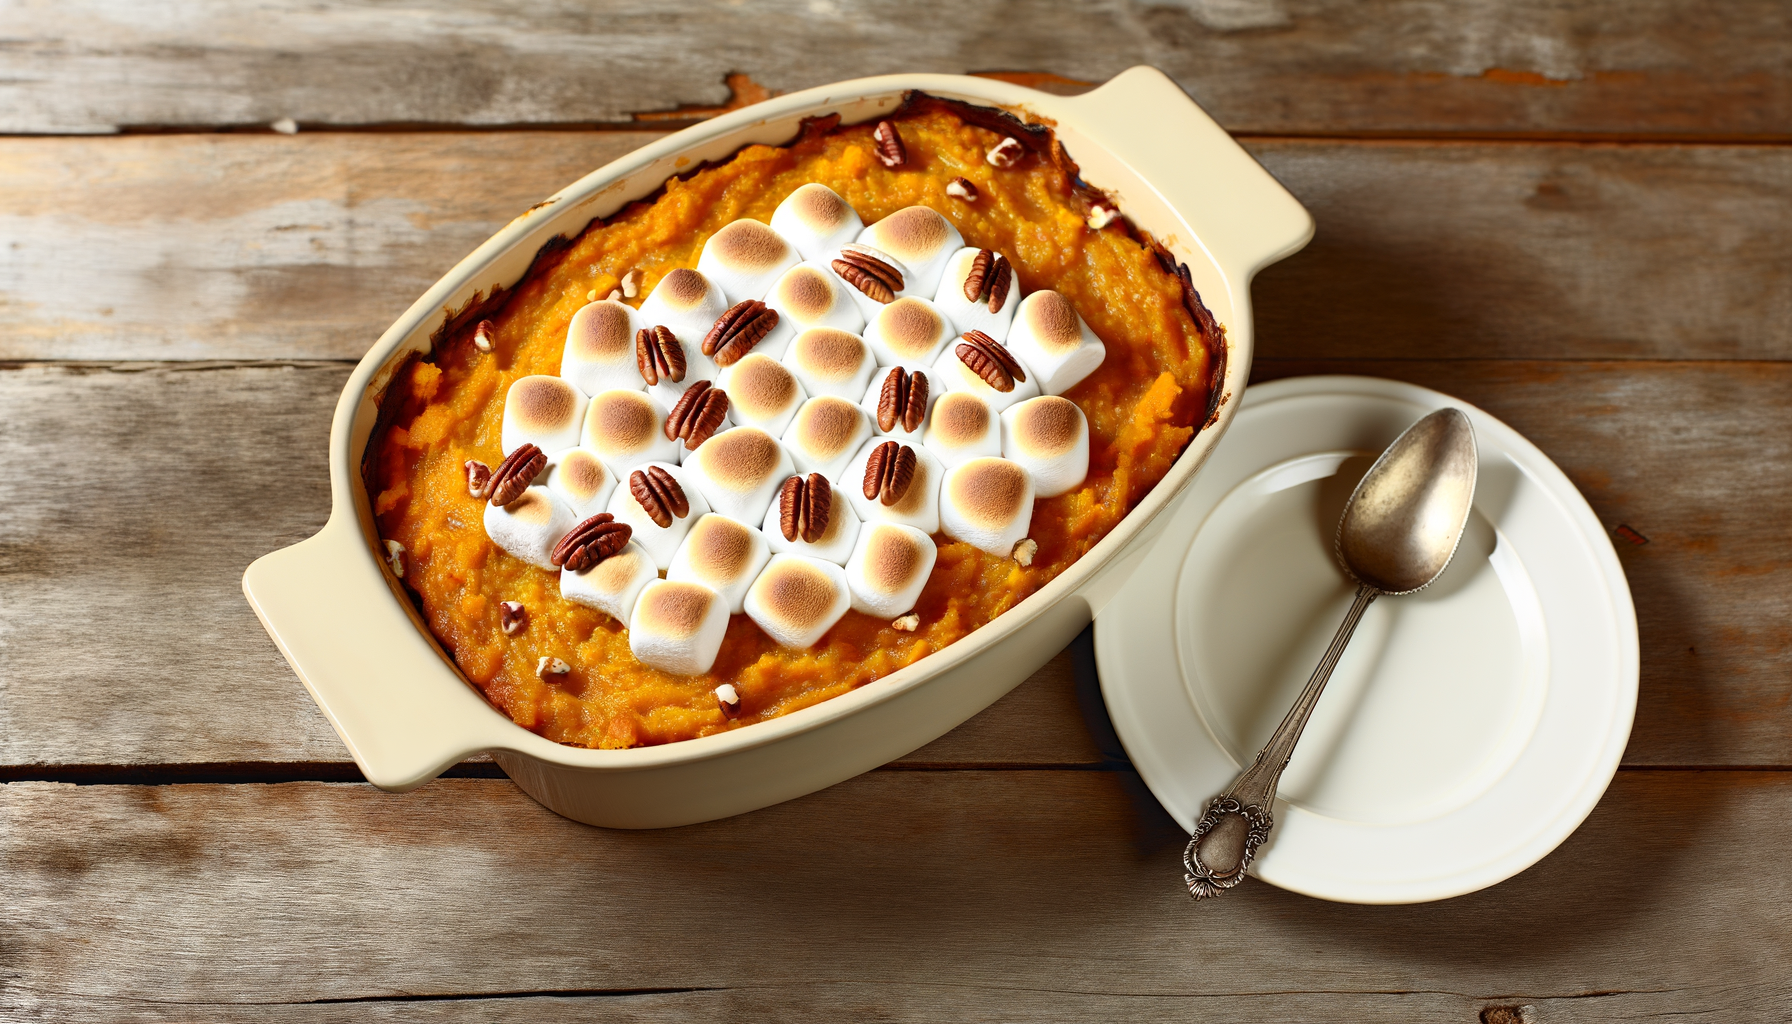 Sweet potato casserole dessert with toasted marshmallows and pecans on a rustic table, ready to delight the senses.